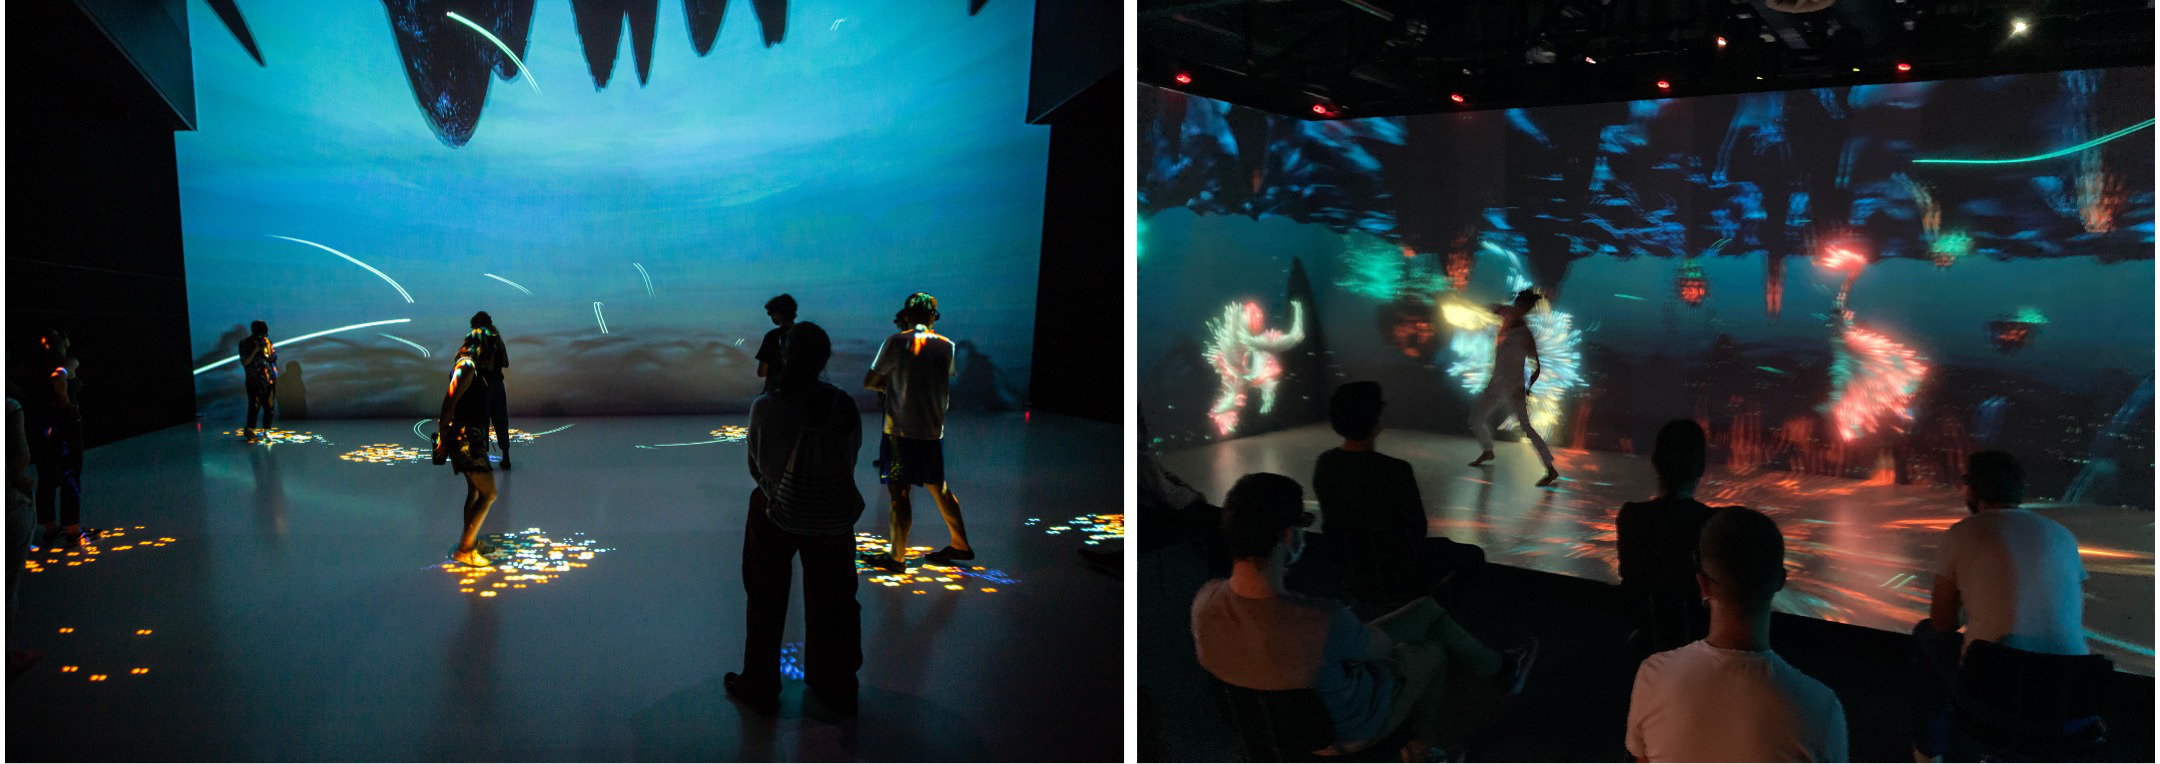 The Creative Harmony performance in Arc Electronica Center (left) and in Immersia (right).